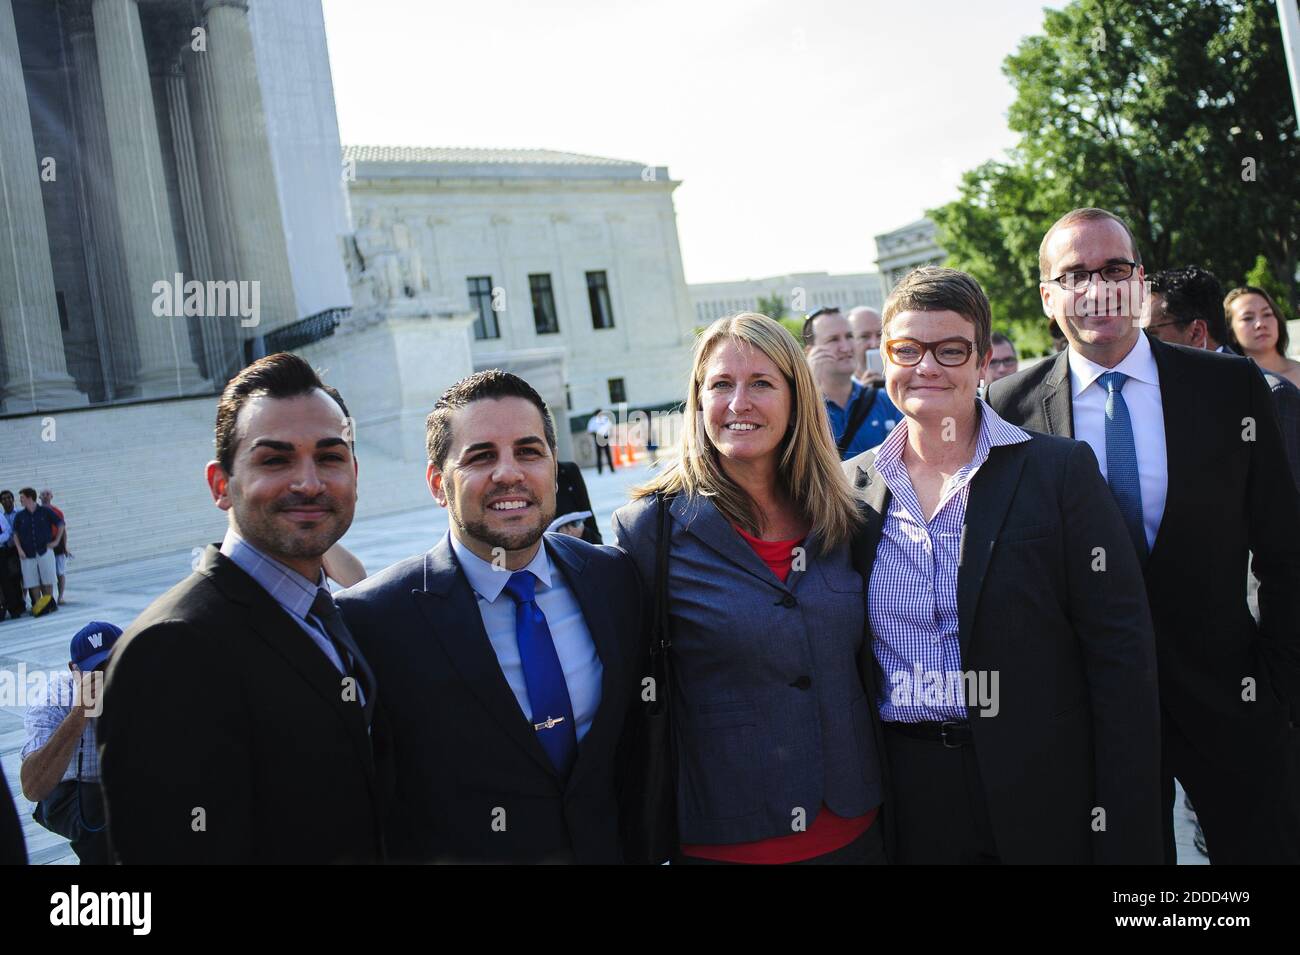 NO FILM, NO VIDEO, NO TV, NO DOCUMENTARY - Plaintiffs in the challenge to California's Proposition 8, from left, Paul Katami and his partner Jeff Zarillo and Sandy Stier and her partner Kris Perry, stand outside the U.S. Supreme Court on Wednesday, June 26, 2013. While the court struck down the Defense of Marriage Act, it chose not to rule on an appeal on Proposition 8 effectively undercutting the law. Photo by Pete Marovich/MCT/ABACAPRESS.COM Stock Photo